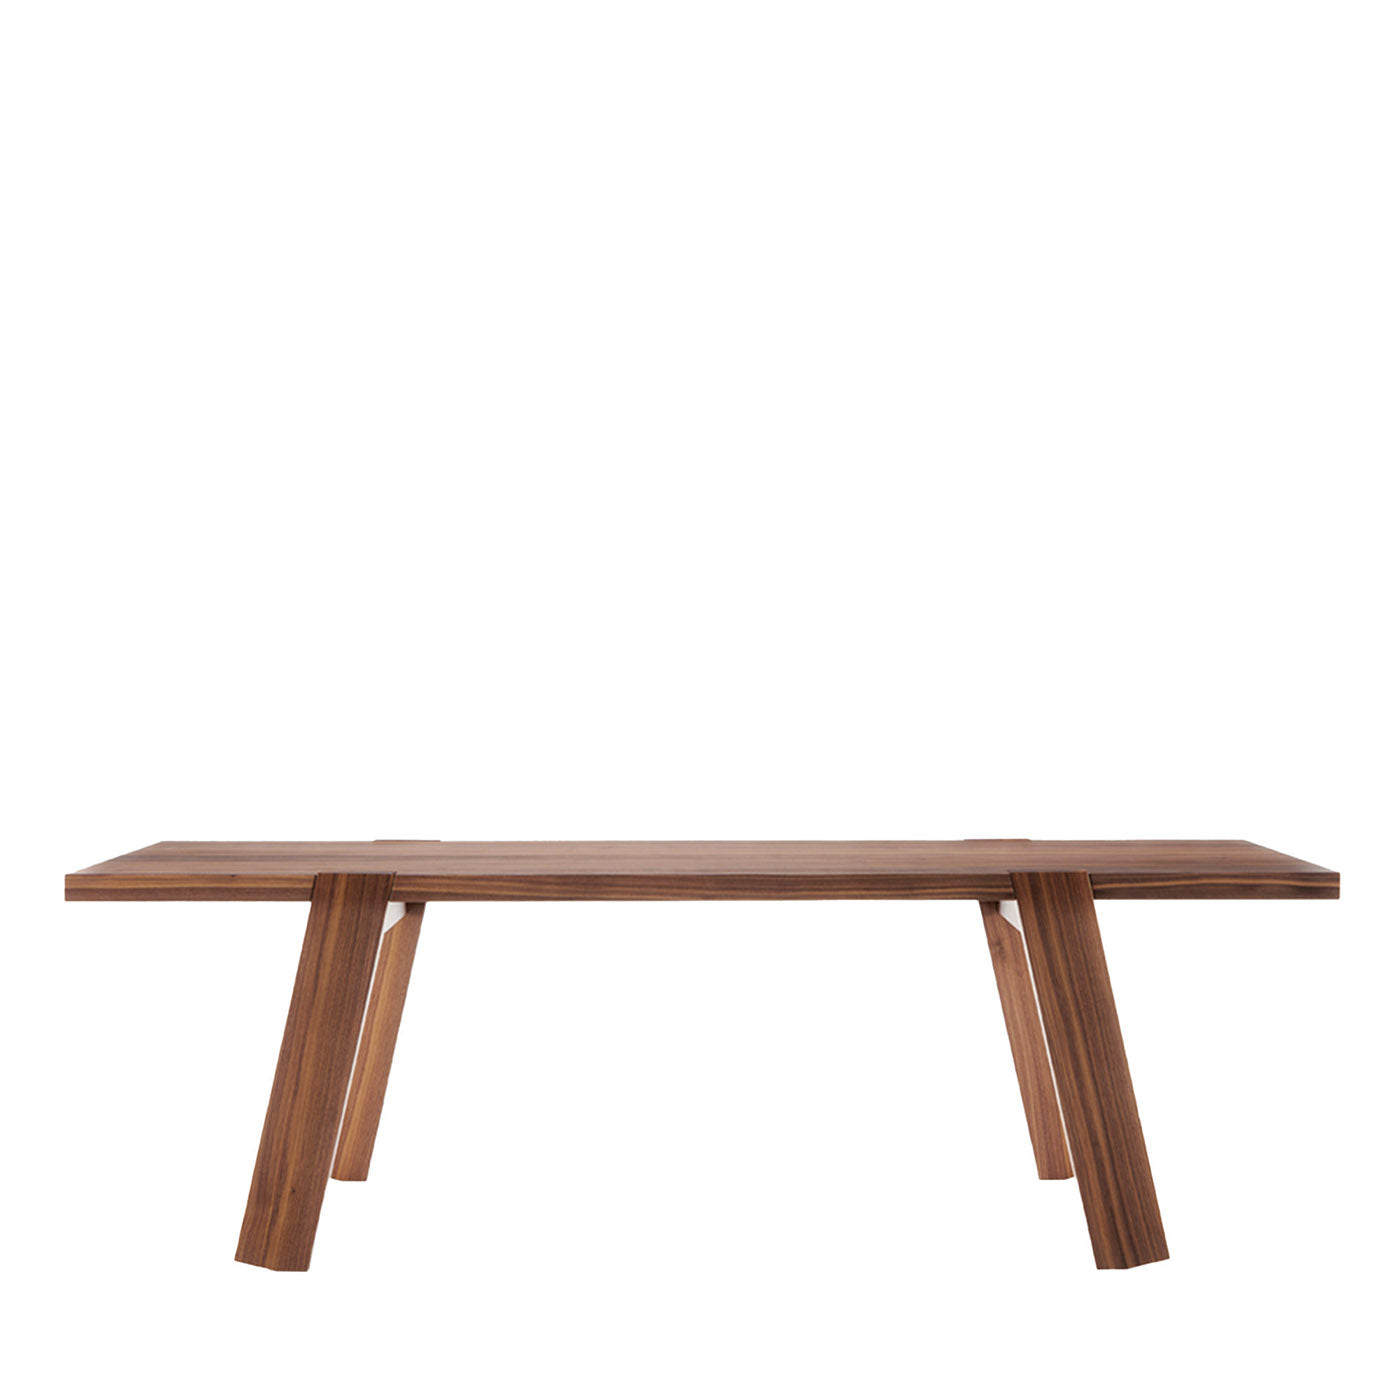 Japan Rectangular Wooden Table by Franco Poli - Main view